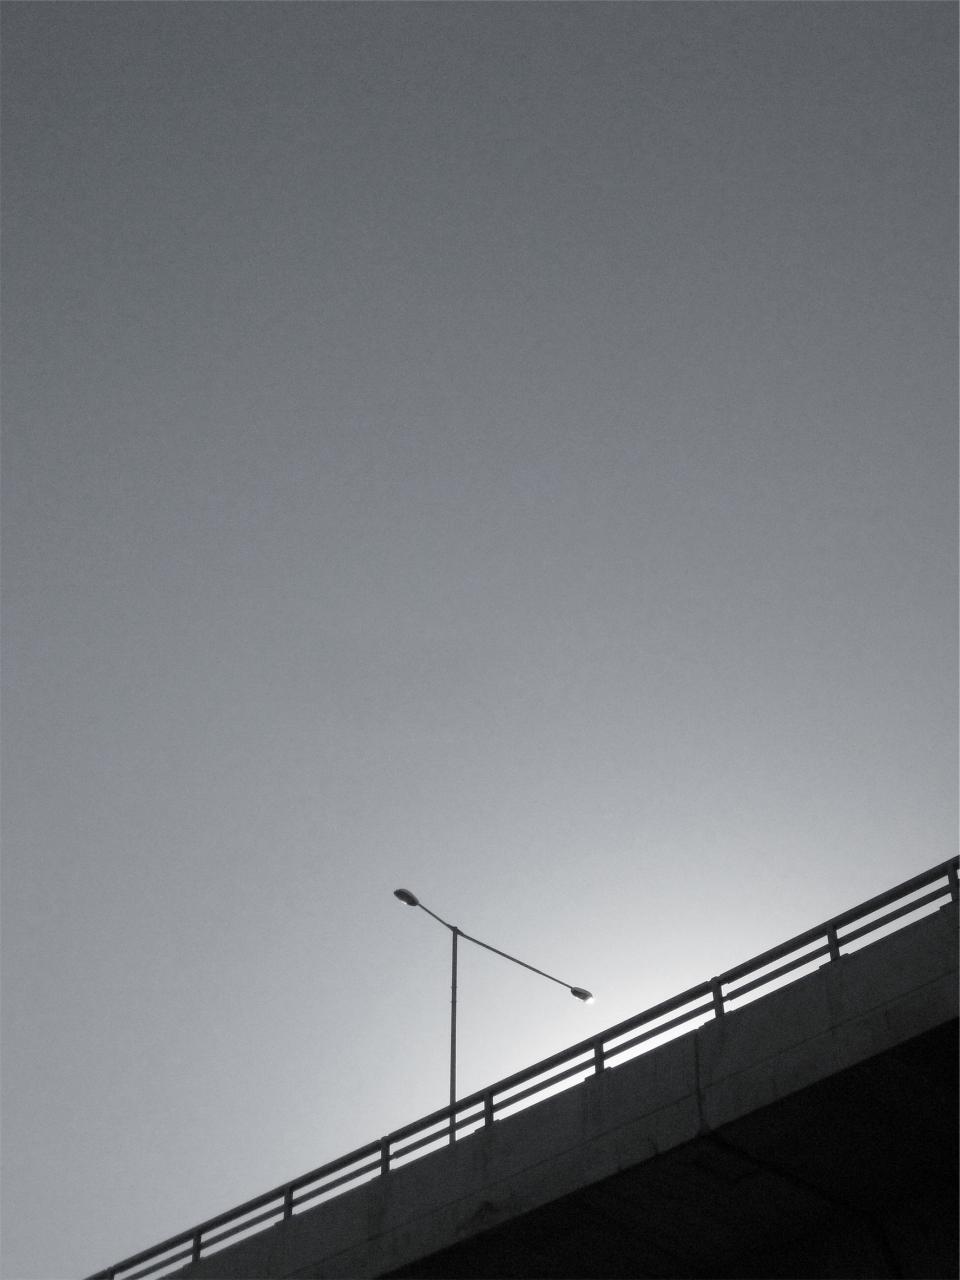 overpass lamp post black and white - WeLoveSoLo